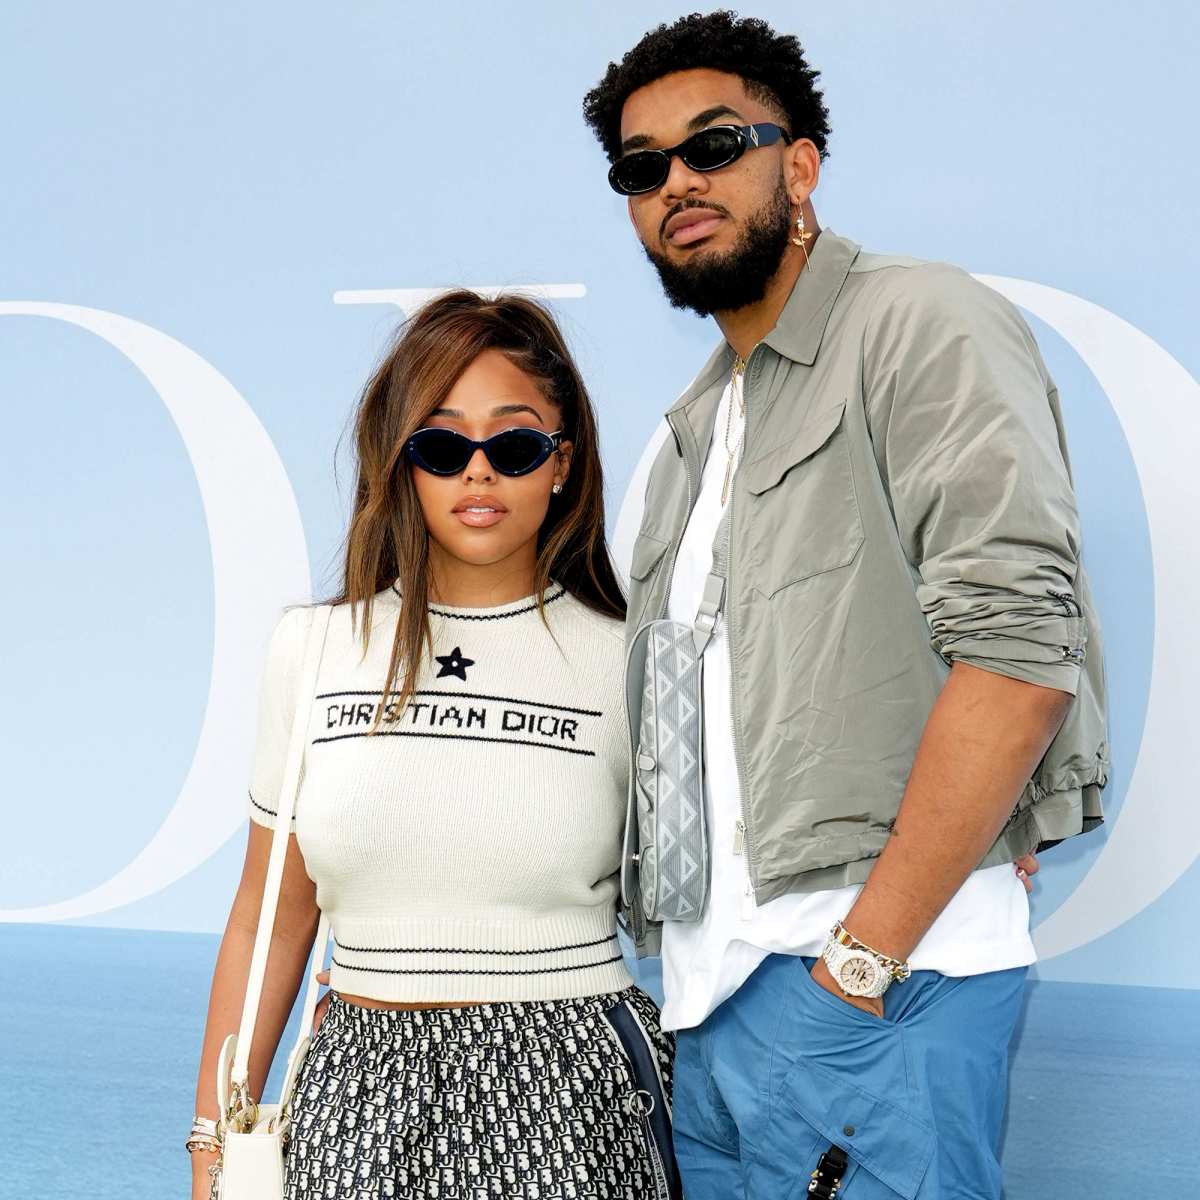 He's coming for it”: Jordyn Woods hypes up boyfriend Karl-Anthony Towns,  lauds his offseason hustle for 2023-24